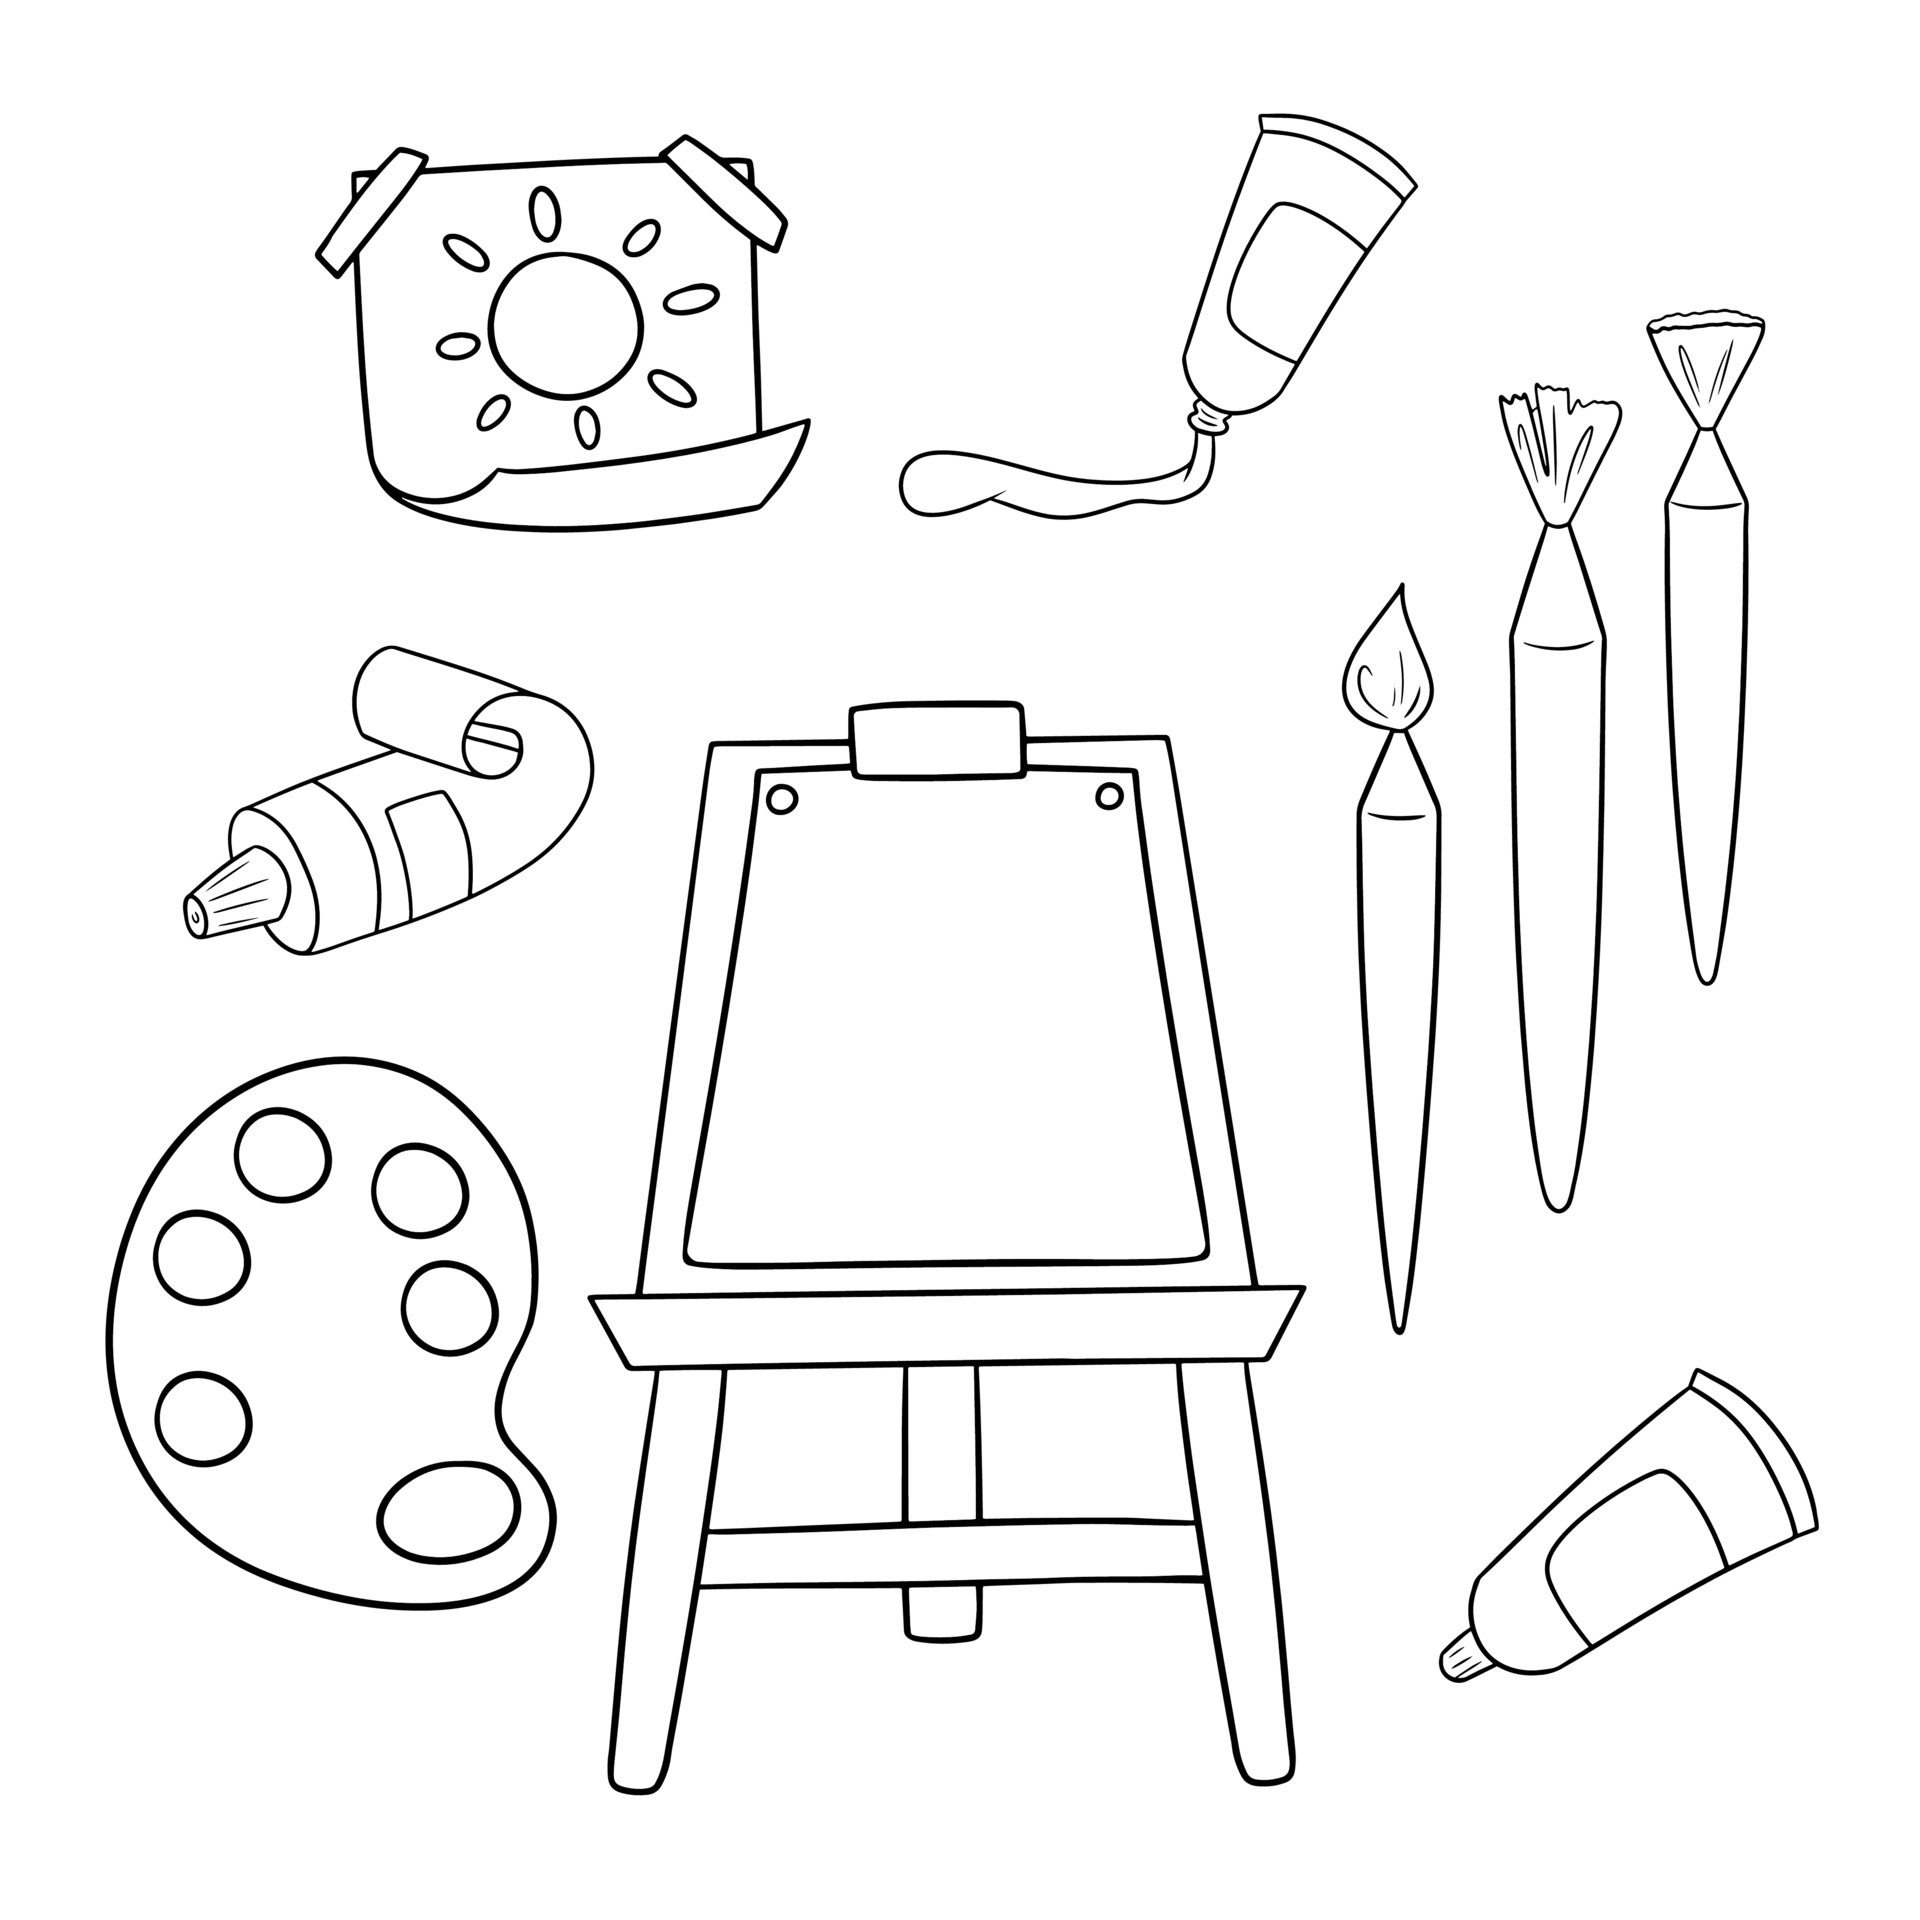 Premium Vector  Paint art tools. artistic supplies, painting and drawing  materials, brushes, paints, easel, creative art tools illustration icons  set. paint drawing brush, education artistic tool